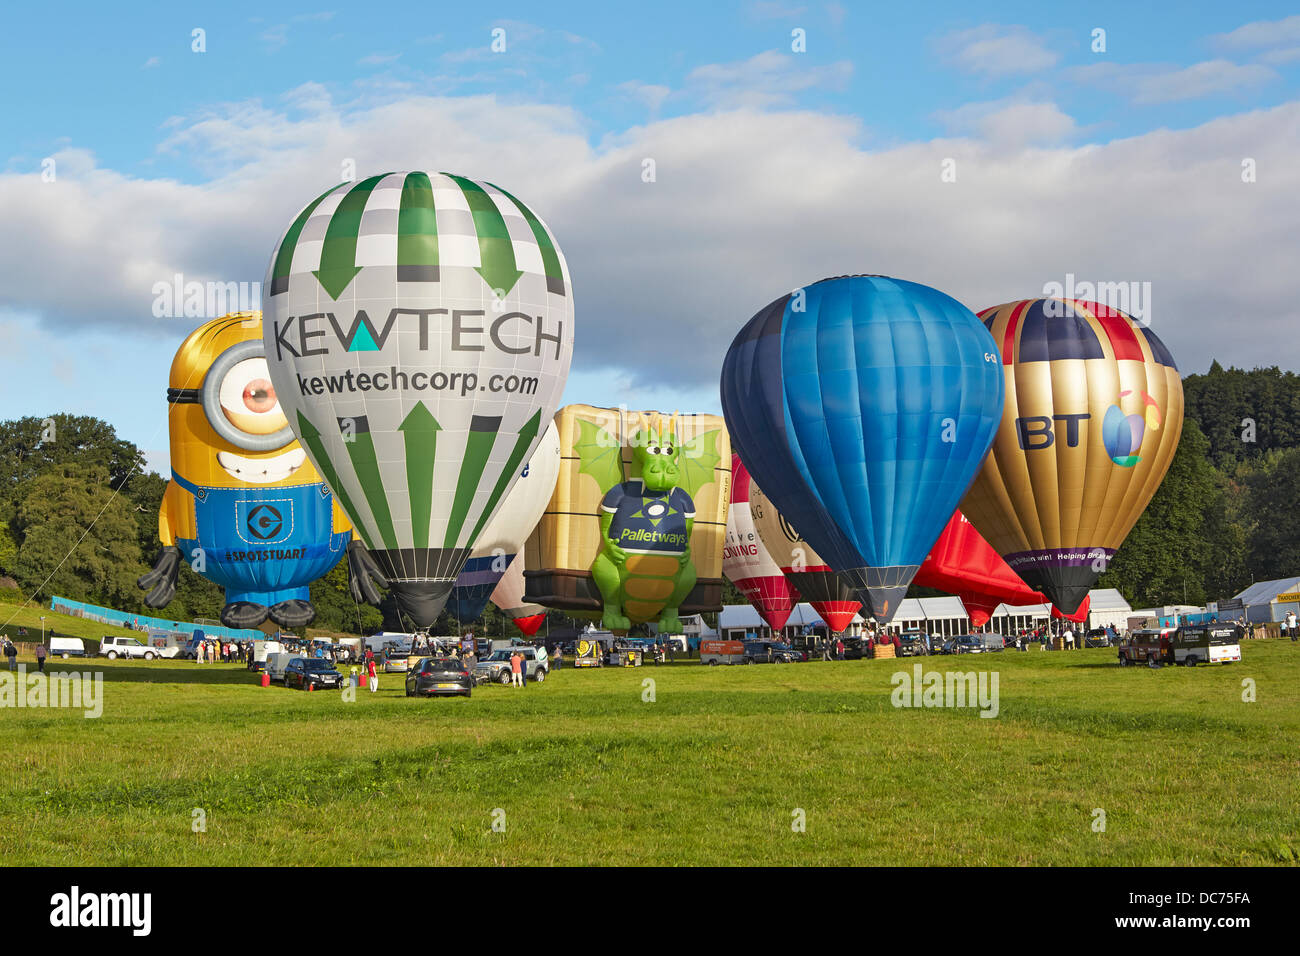 Bristol, UK. 9th Aug, 2013. Balloons at the 35th UK Bristol balloon fiesta at the Ashton court estate Morning launch launch on the 9th August 2013 including the BT FT Ricoh Palletways and Despicable Me Stuart minion balloons Credit:  David Lyon/Alamy Live News Stock Photo